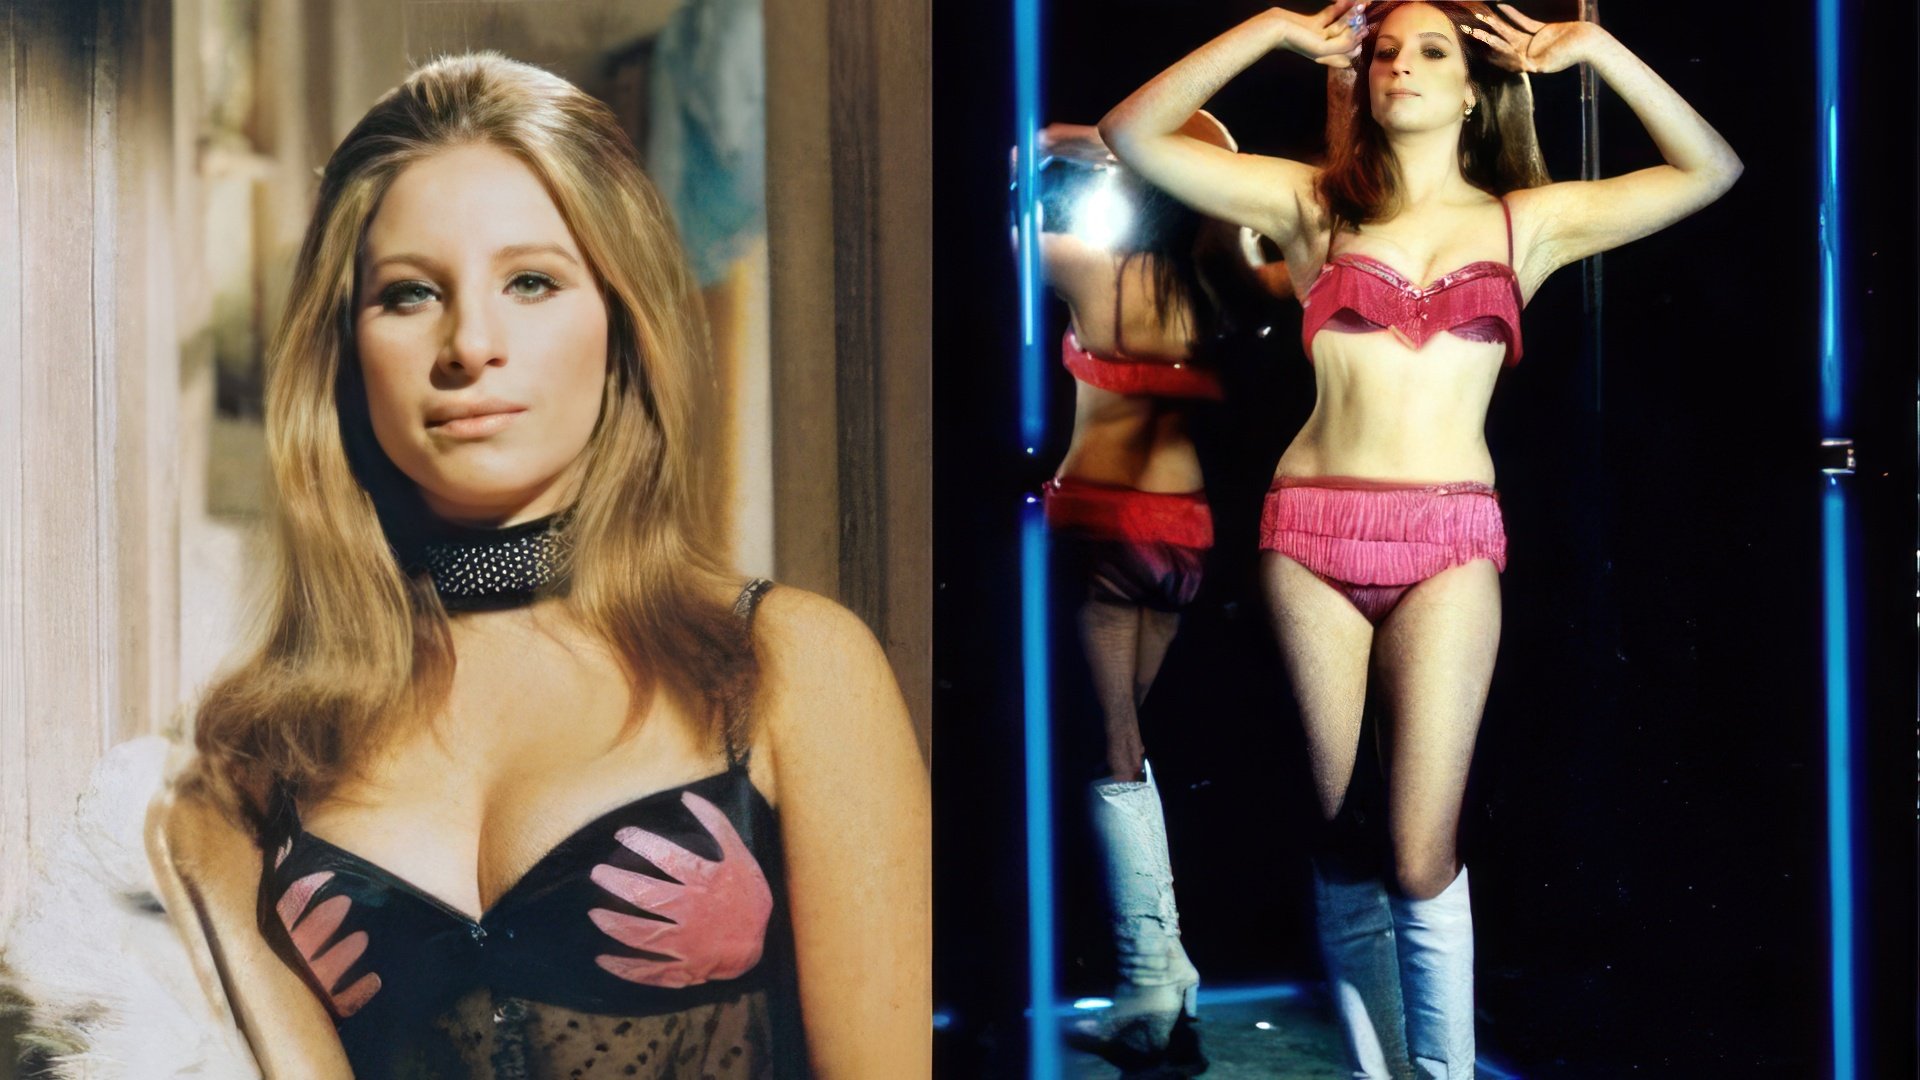 Barbra Streisand in the film The Owl and the Pussycat